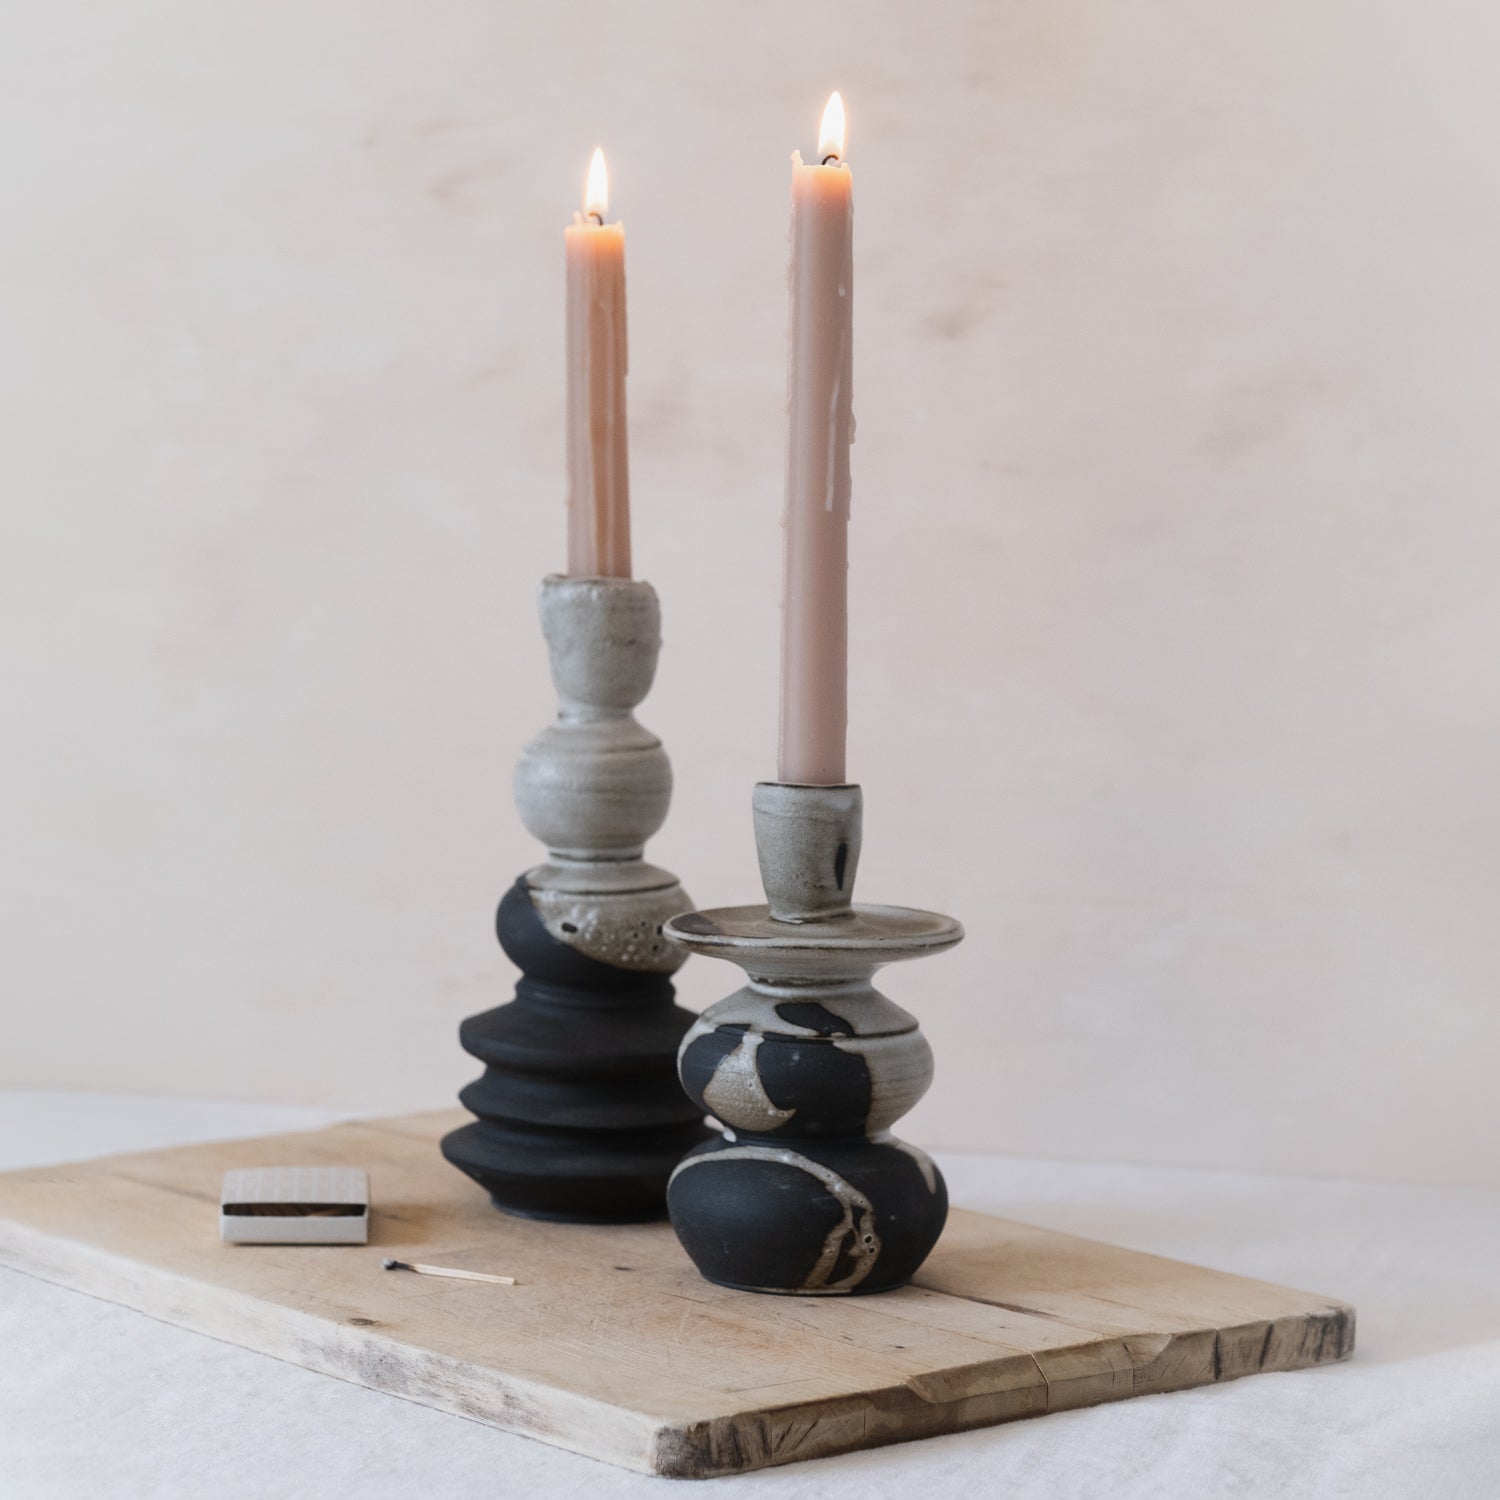 Two handmade black and white ceramic candlesticks in different sizes with pink tapered candles. A box of matches sits to the left of the unique candle holders